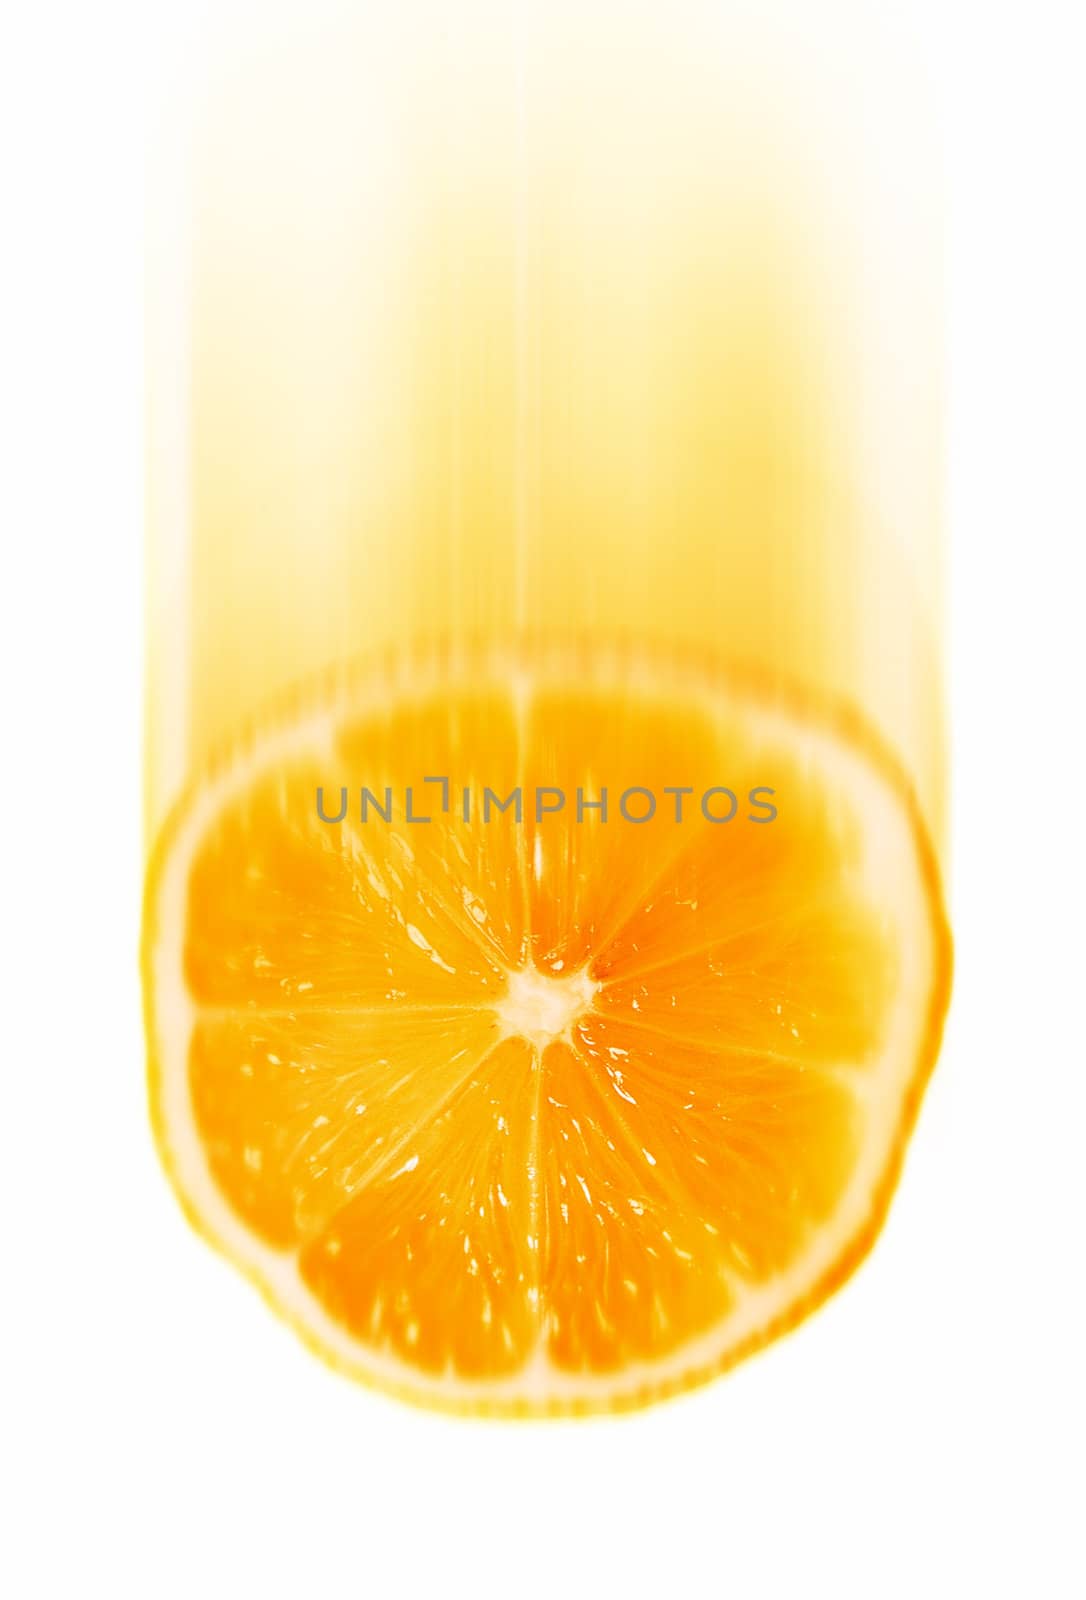 Falling orange slice with motion blur isolated on a white background.